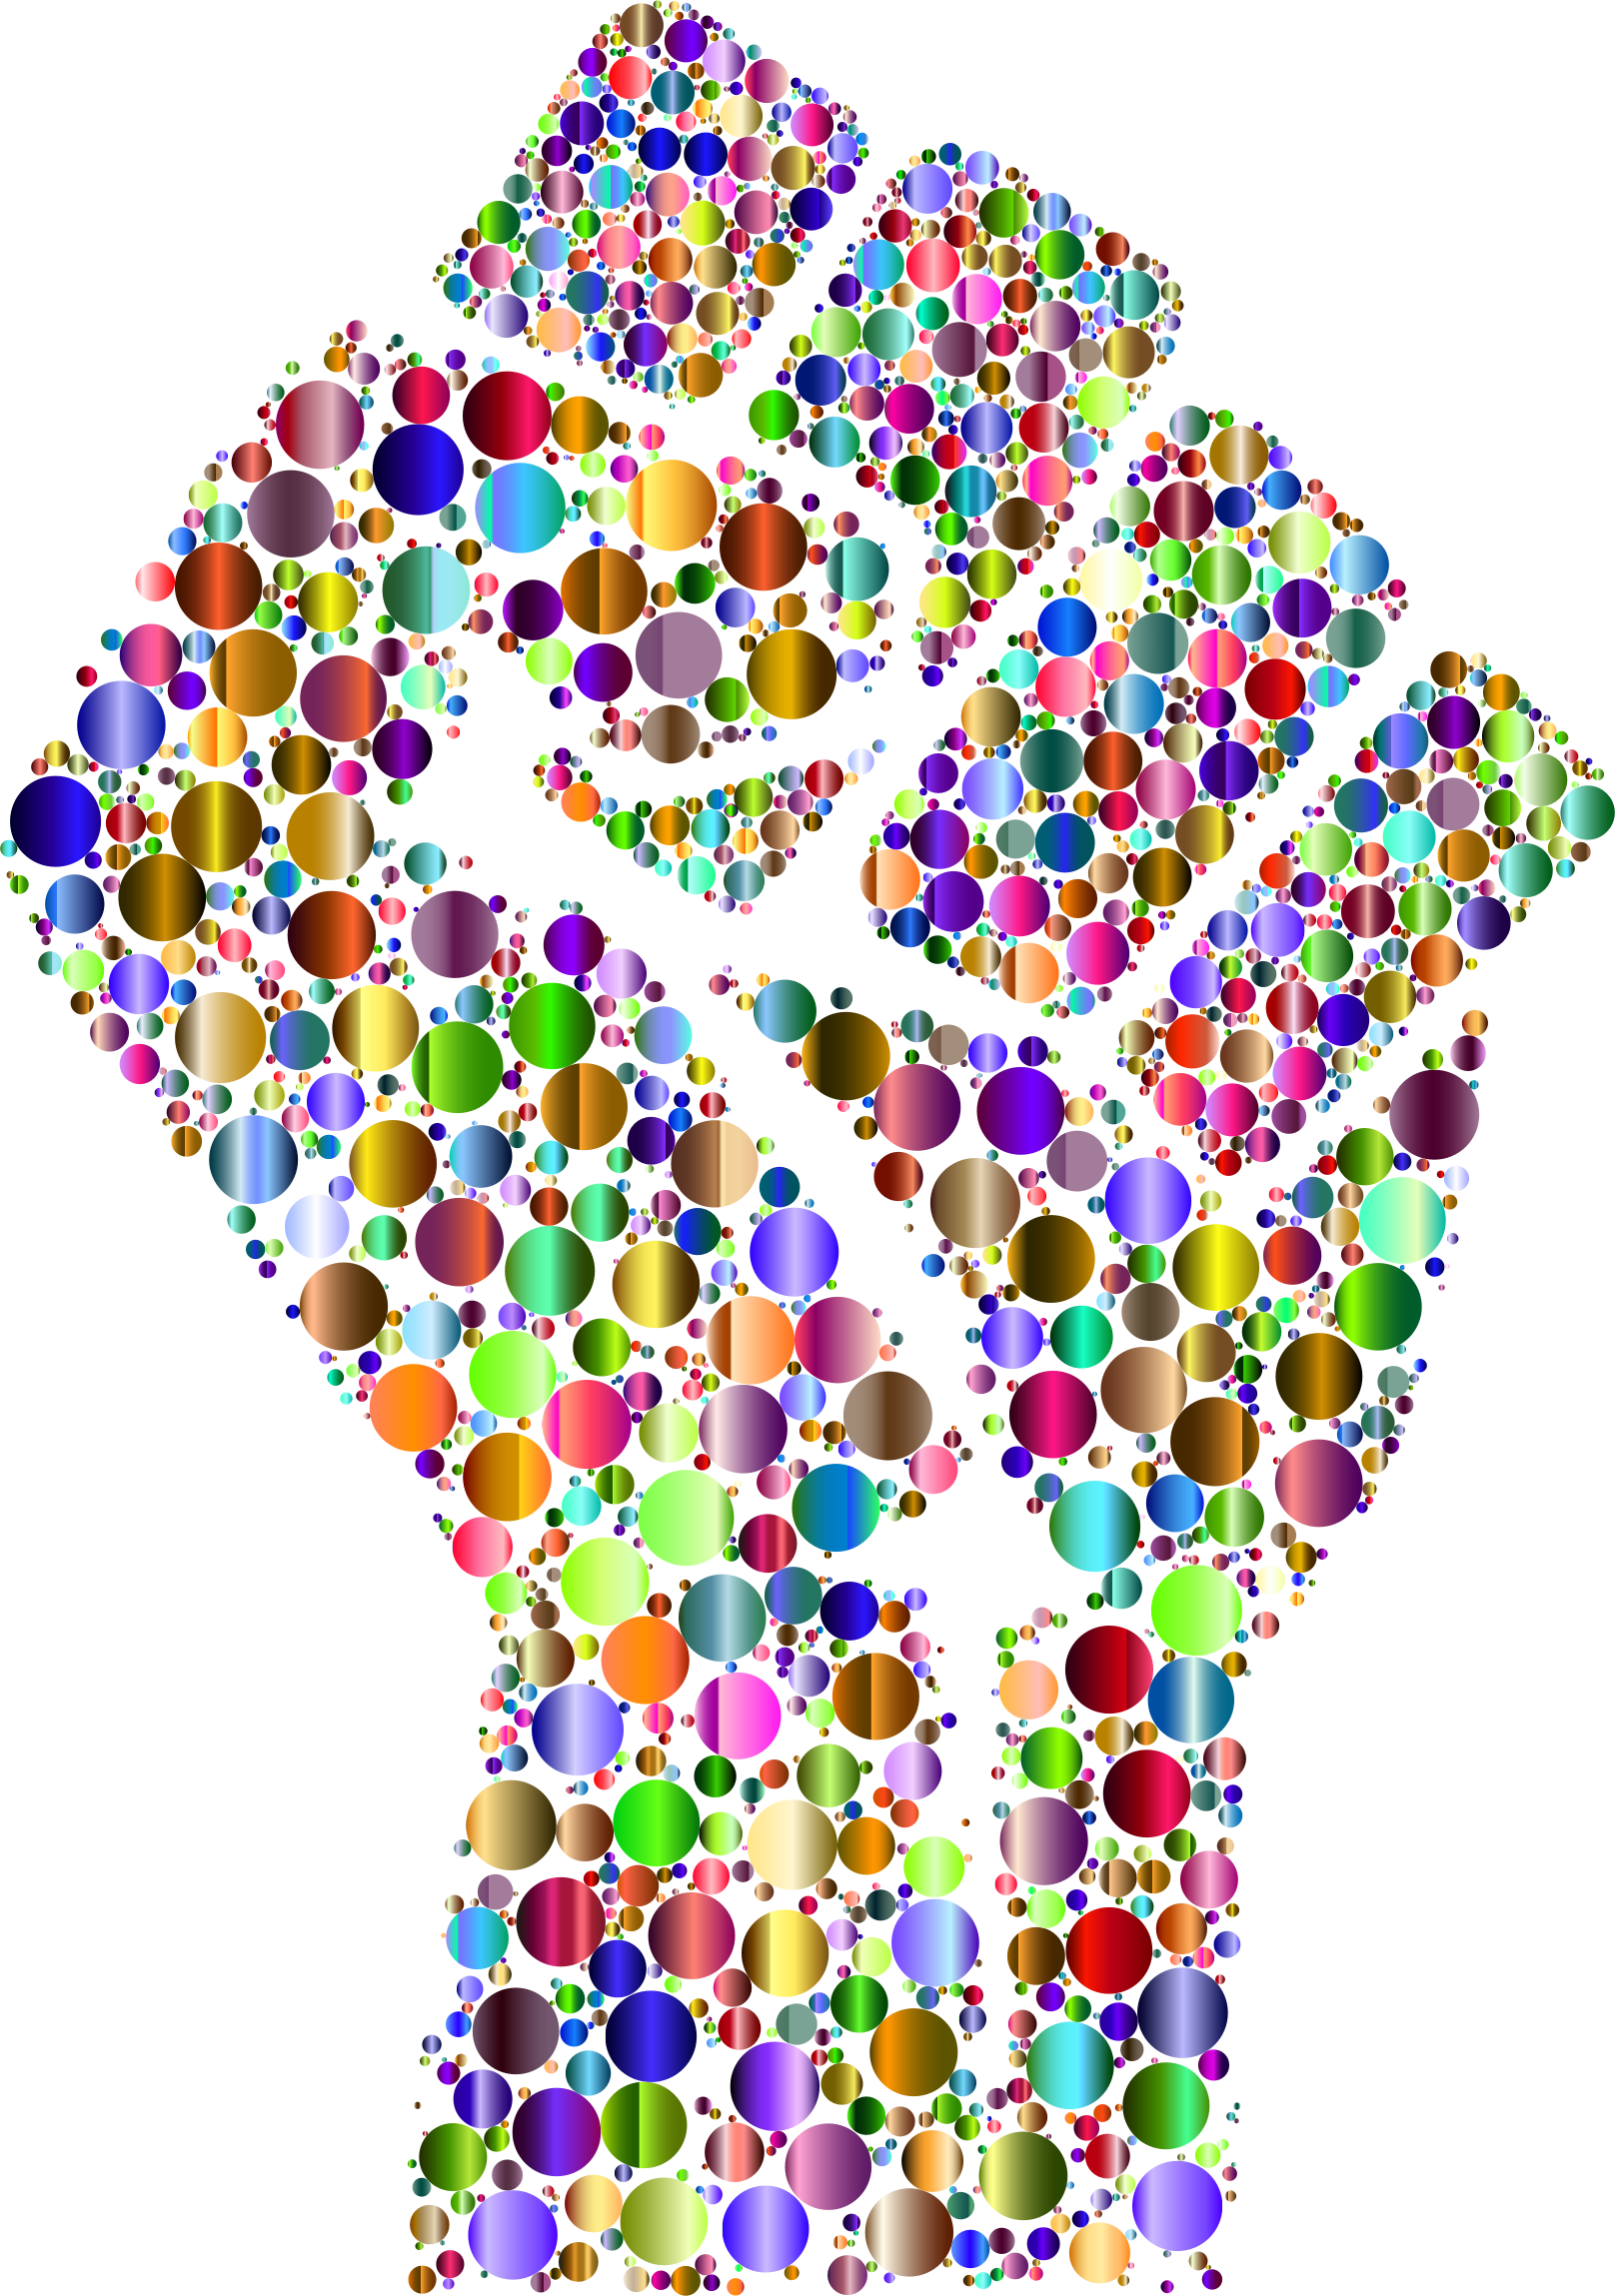 Big Image - Fist With Lots Of Color (1616x2298)